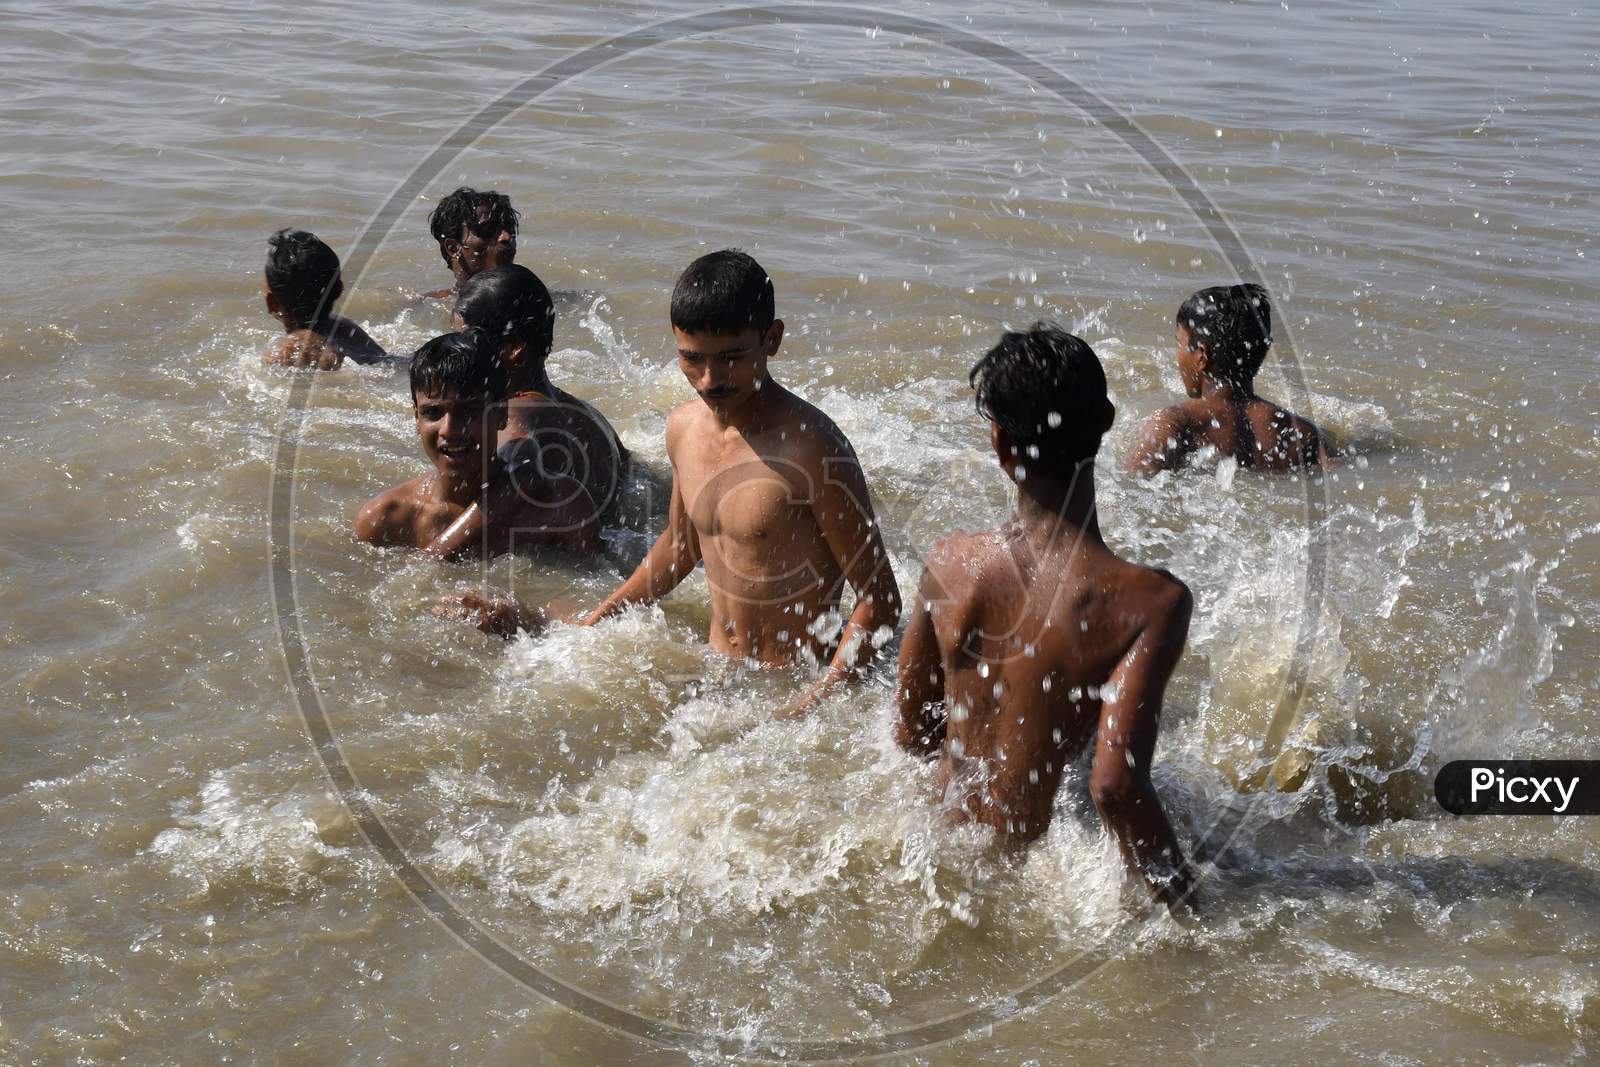 Boys jump in the Brahmaputra river during a hot day in Guwahati ,india on Oct 18,2020